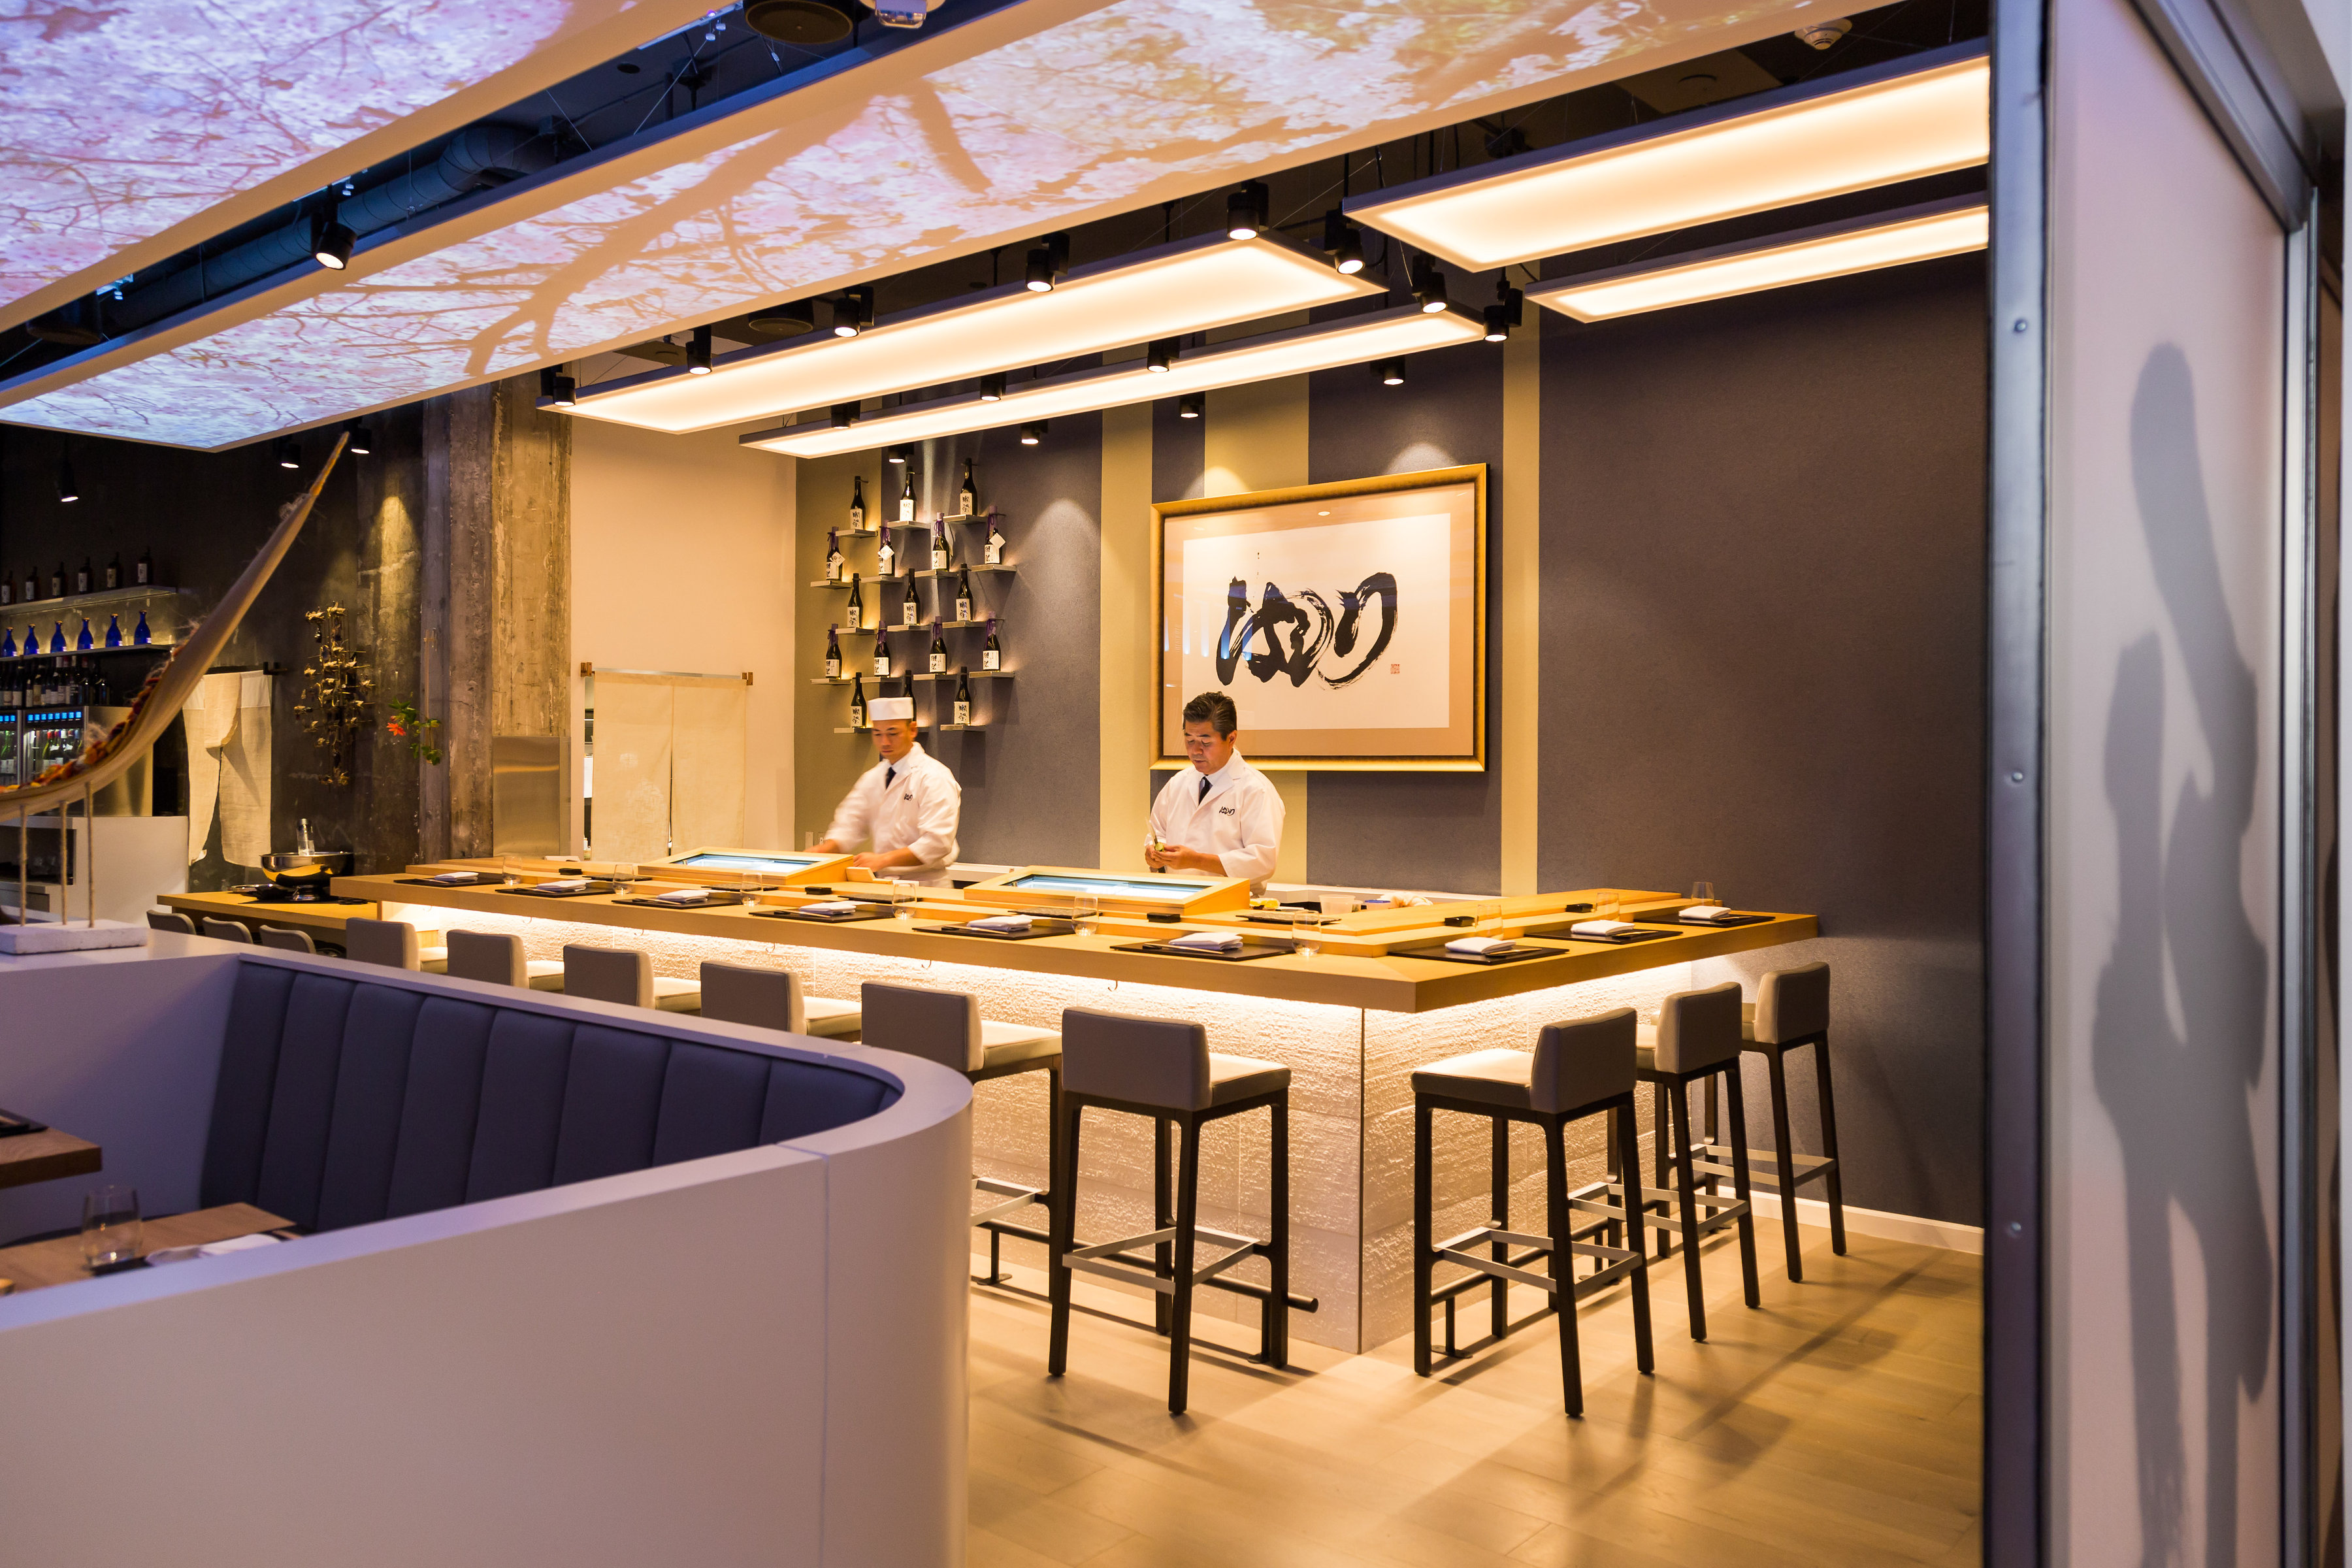 Our Sushi Bar; made out of beautiful imported Japanese Cypress. Chefs are ready and set for Dinner service.